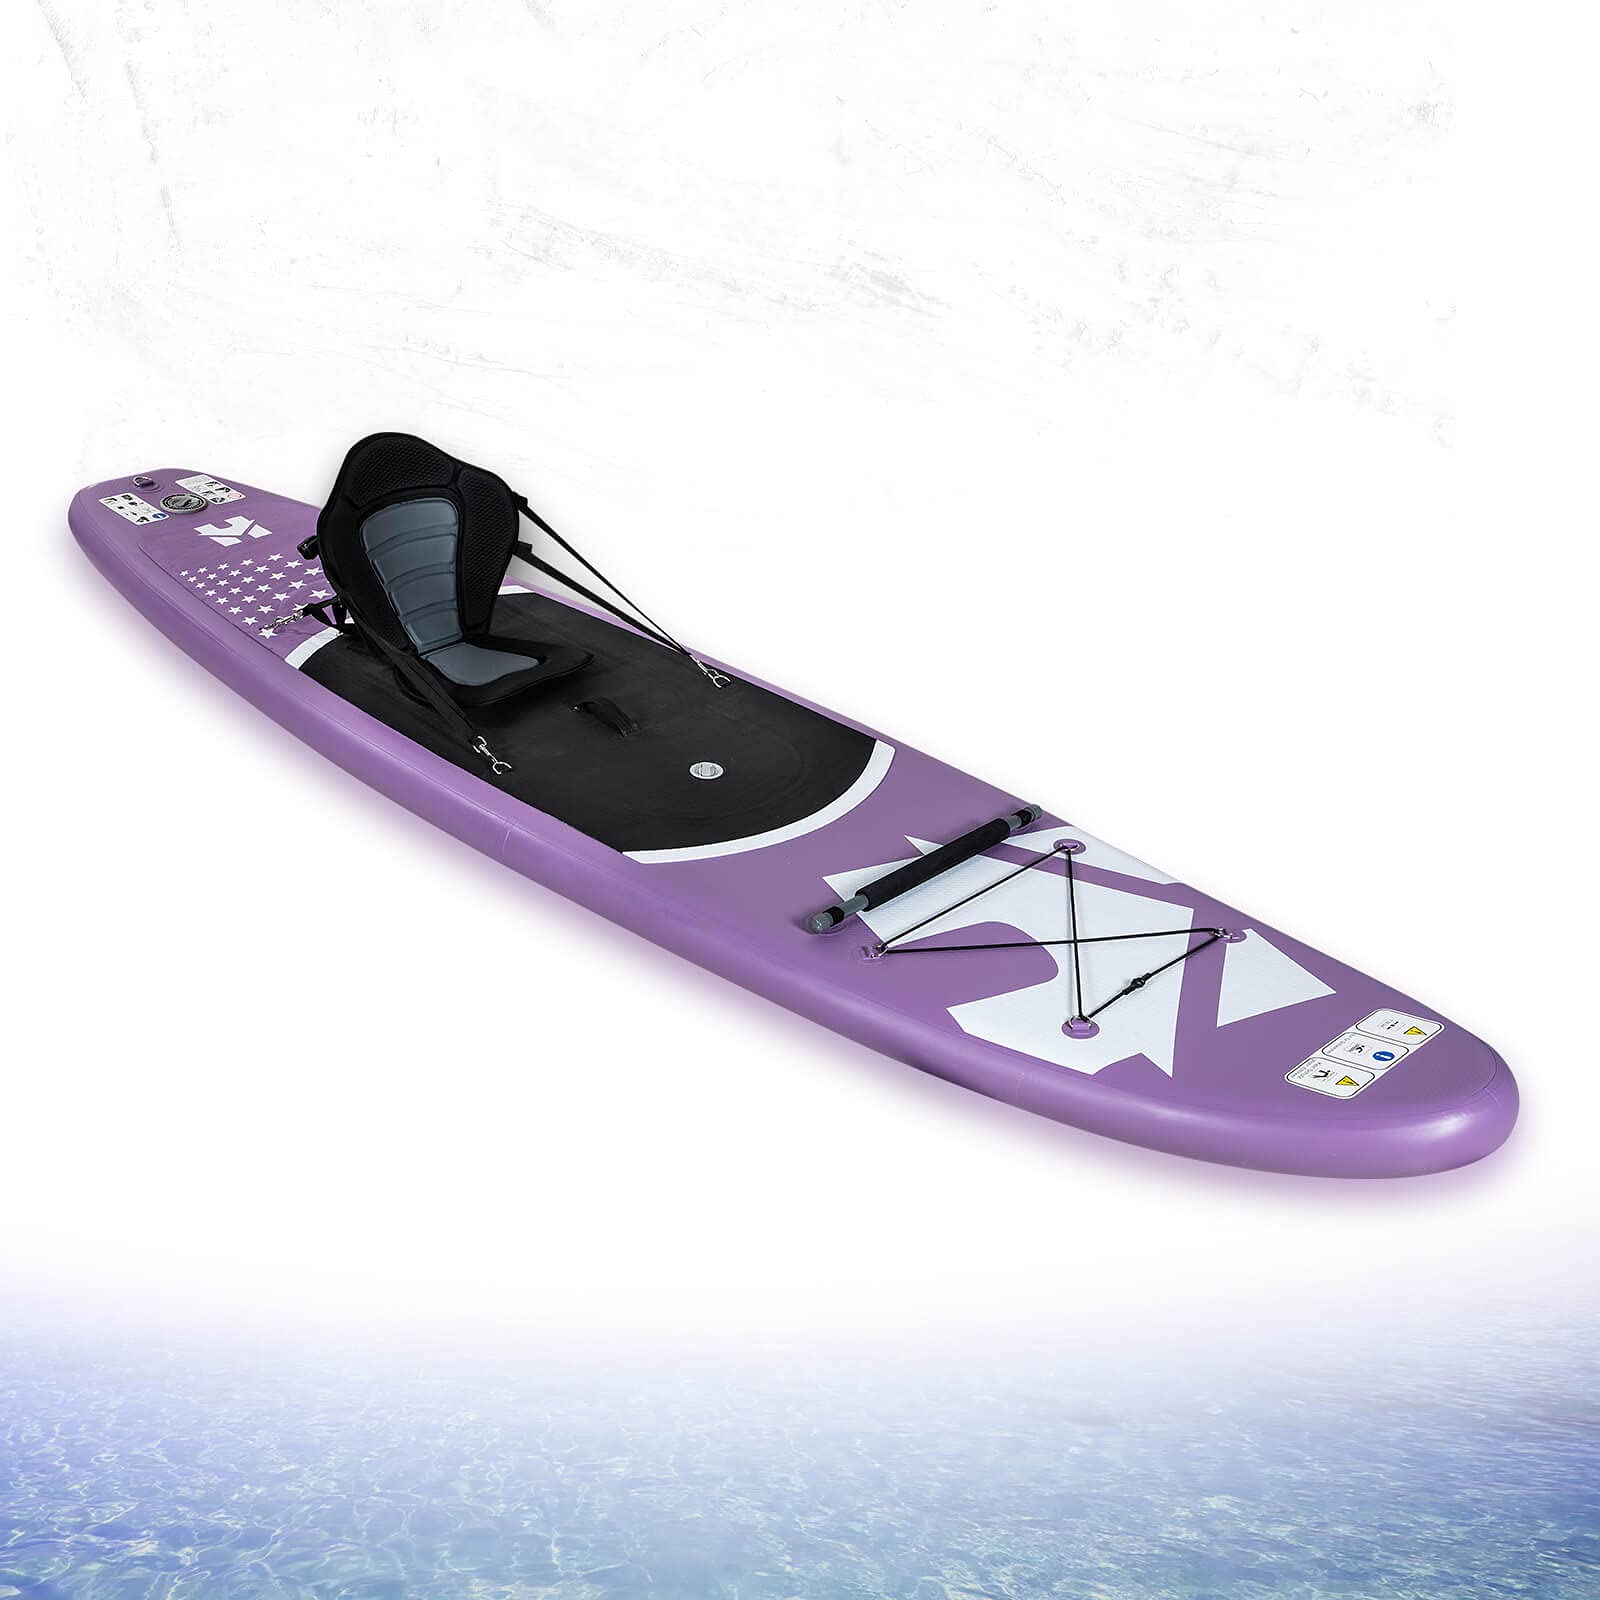 HOME DELUXE - Stand up Paddle Moana - Farbe: Lila, Länge: 320 cm, Breite 81 cm - inkl. Paddel, Reparatur Kit, Transporttasche, Luftpumpe und Sitzbänken | SUP Surfboard Paddle